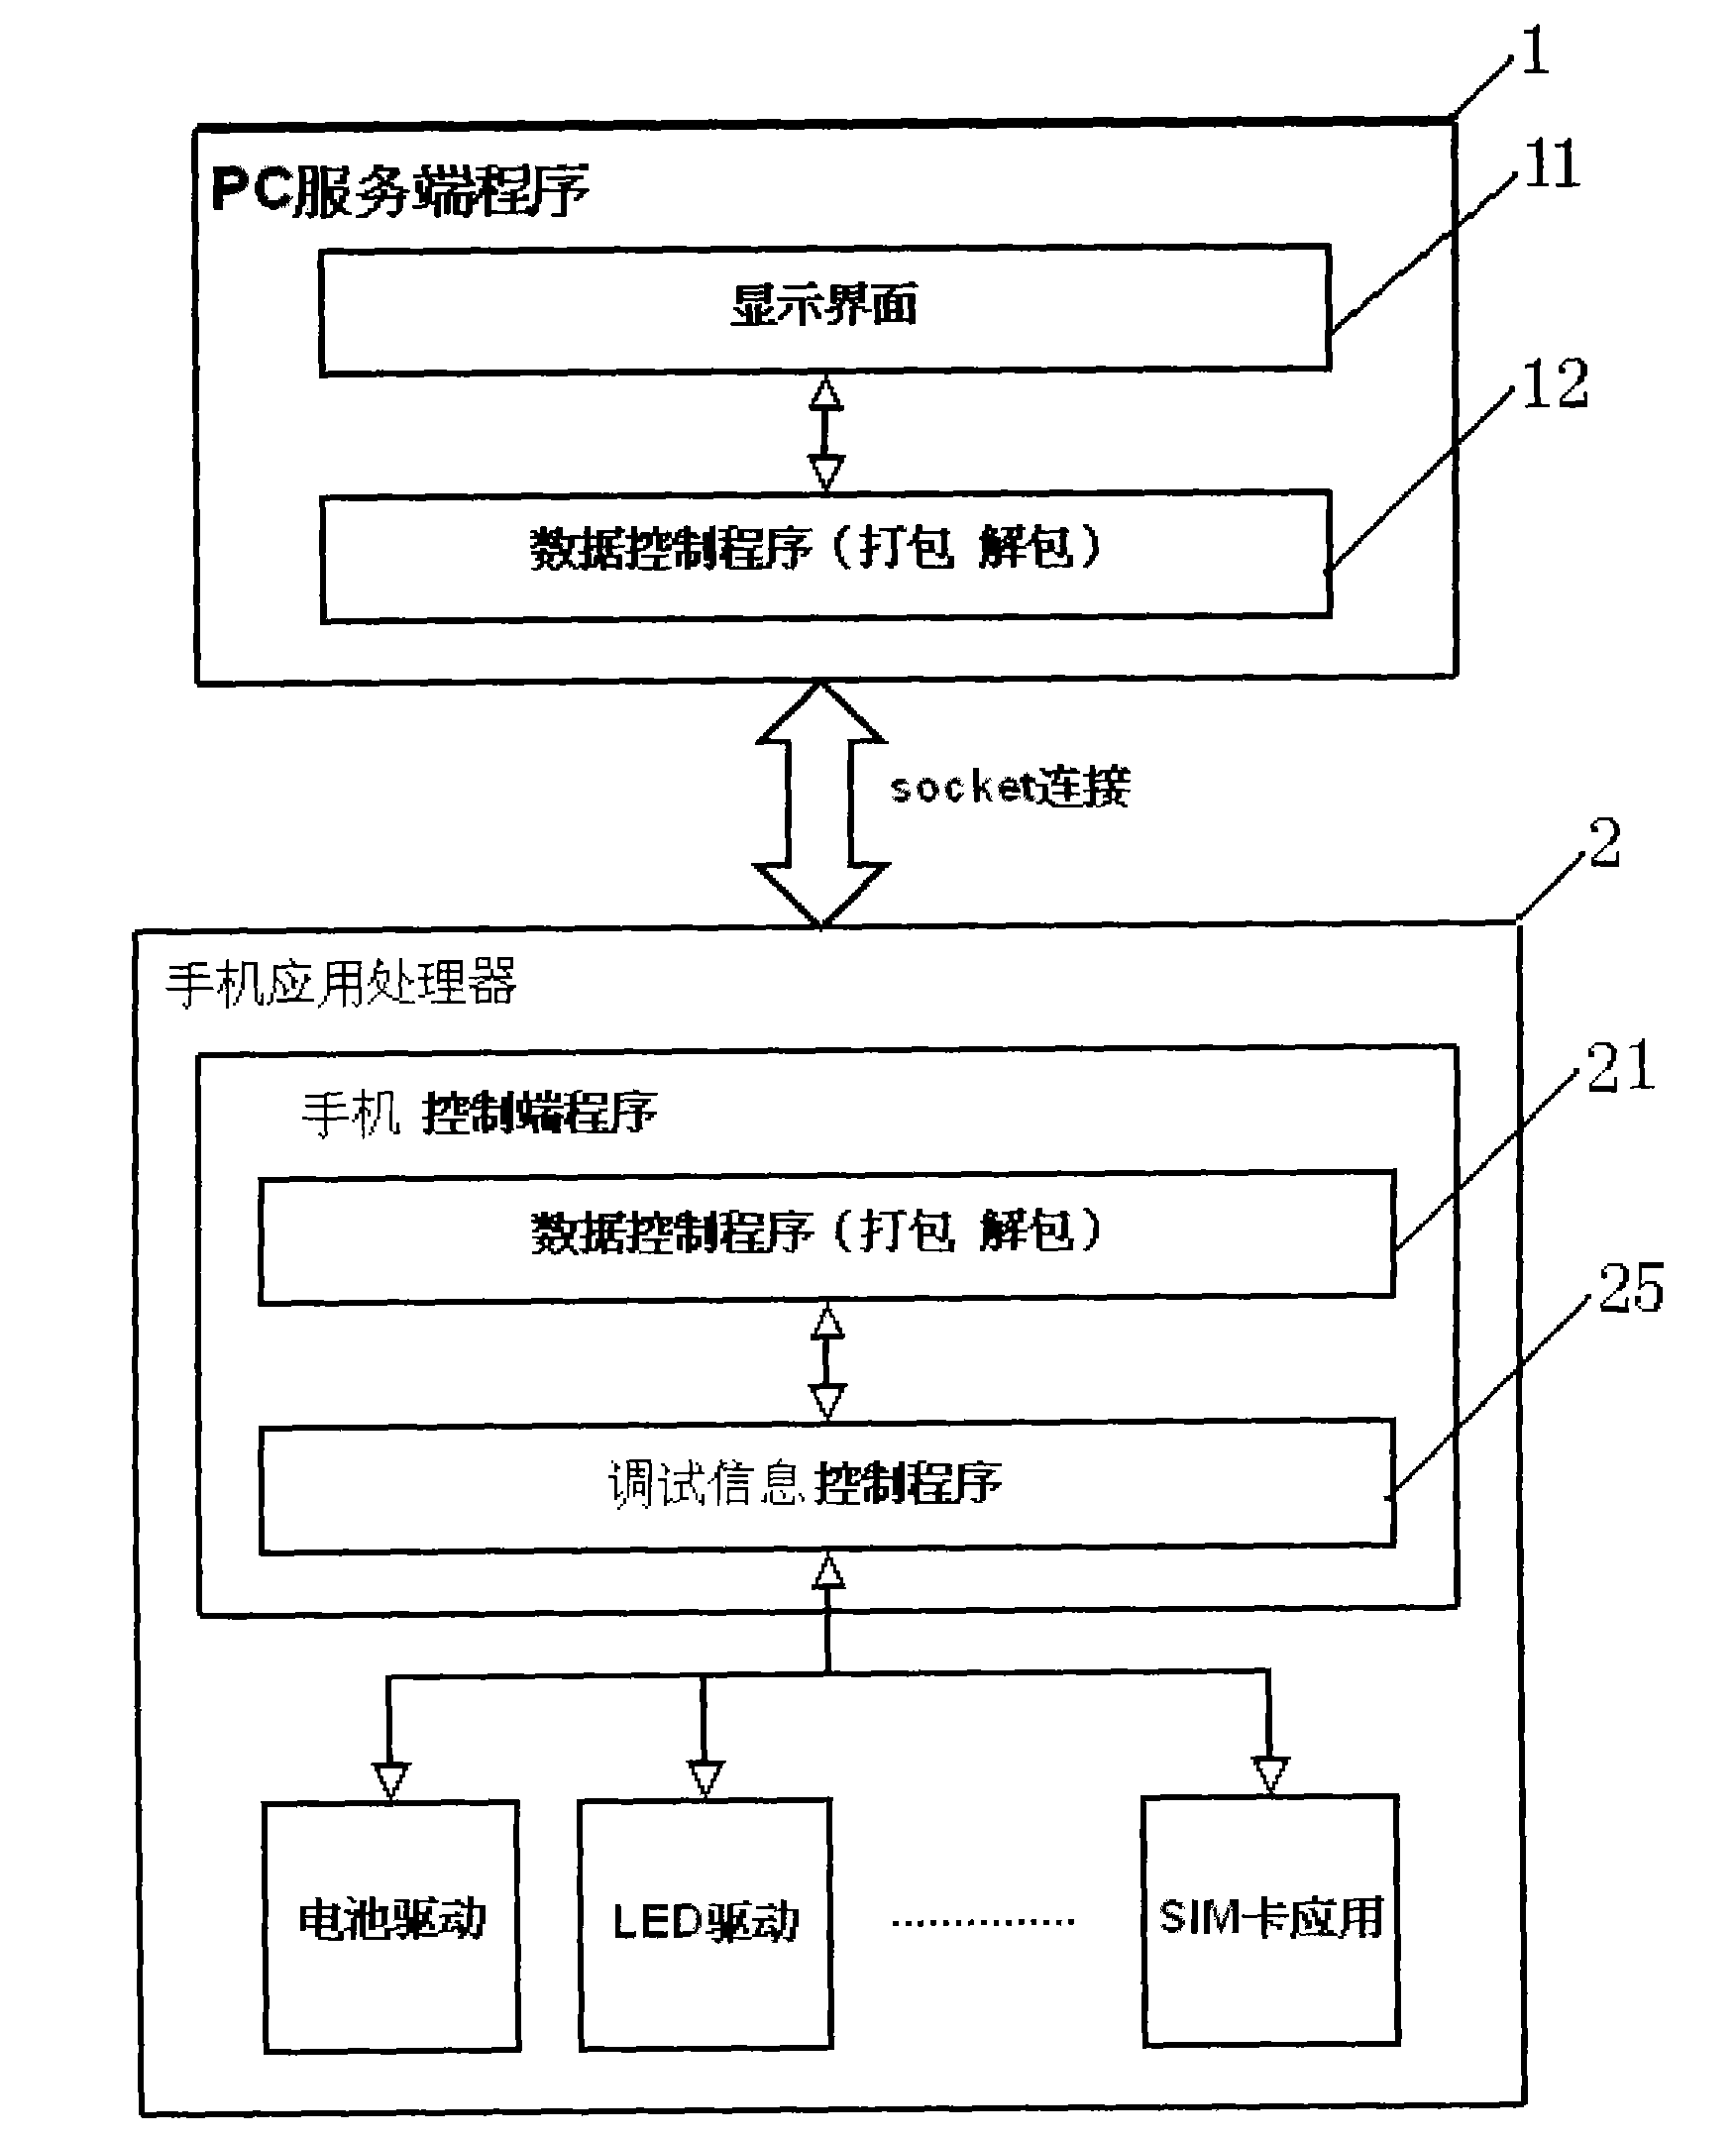 Computer debugging method and apparatus based on AT command of WINDOWS MOBILE